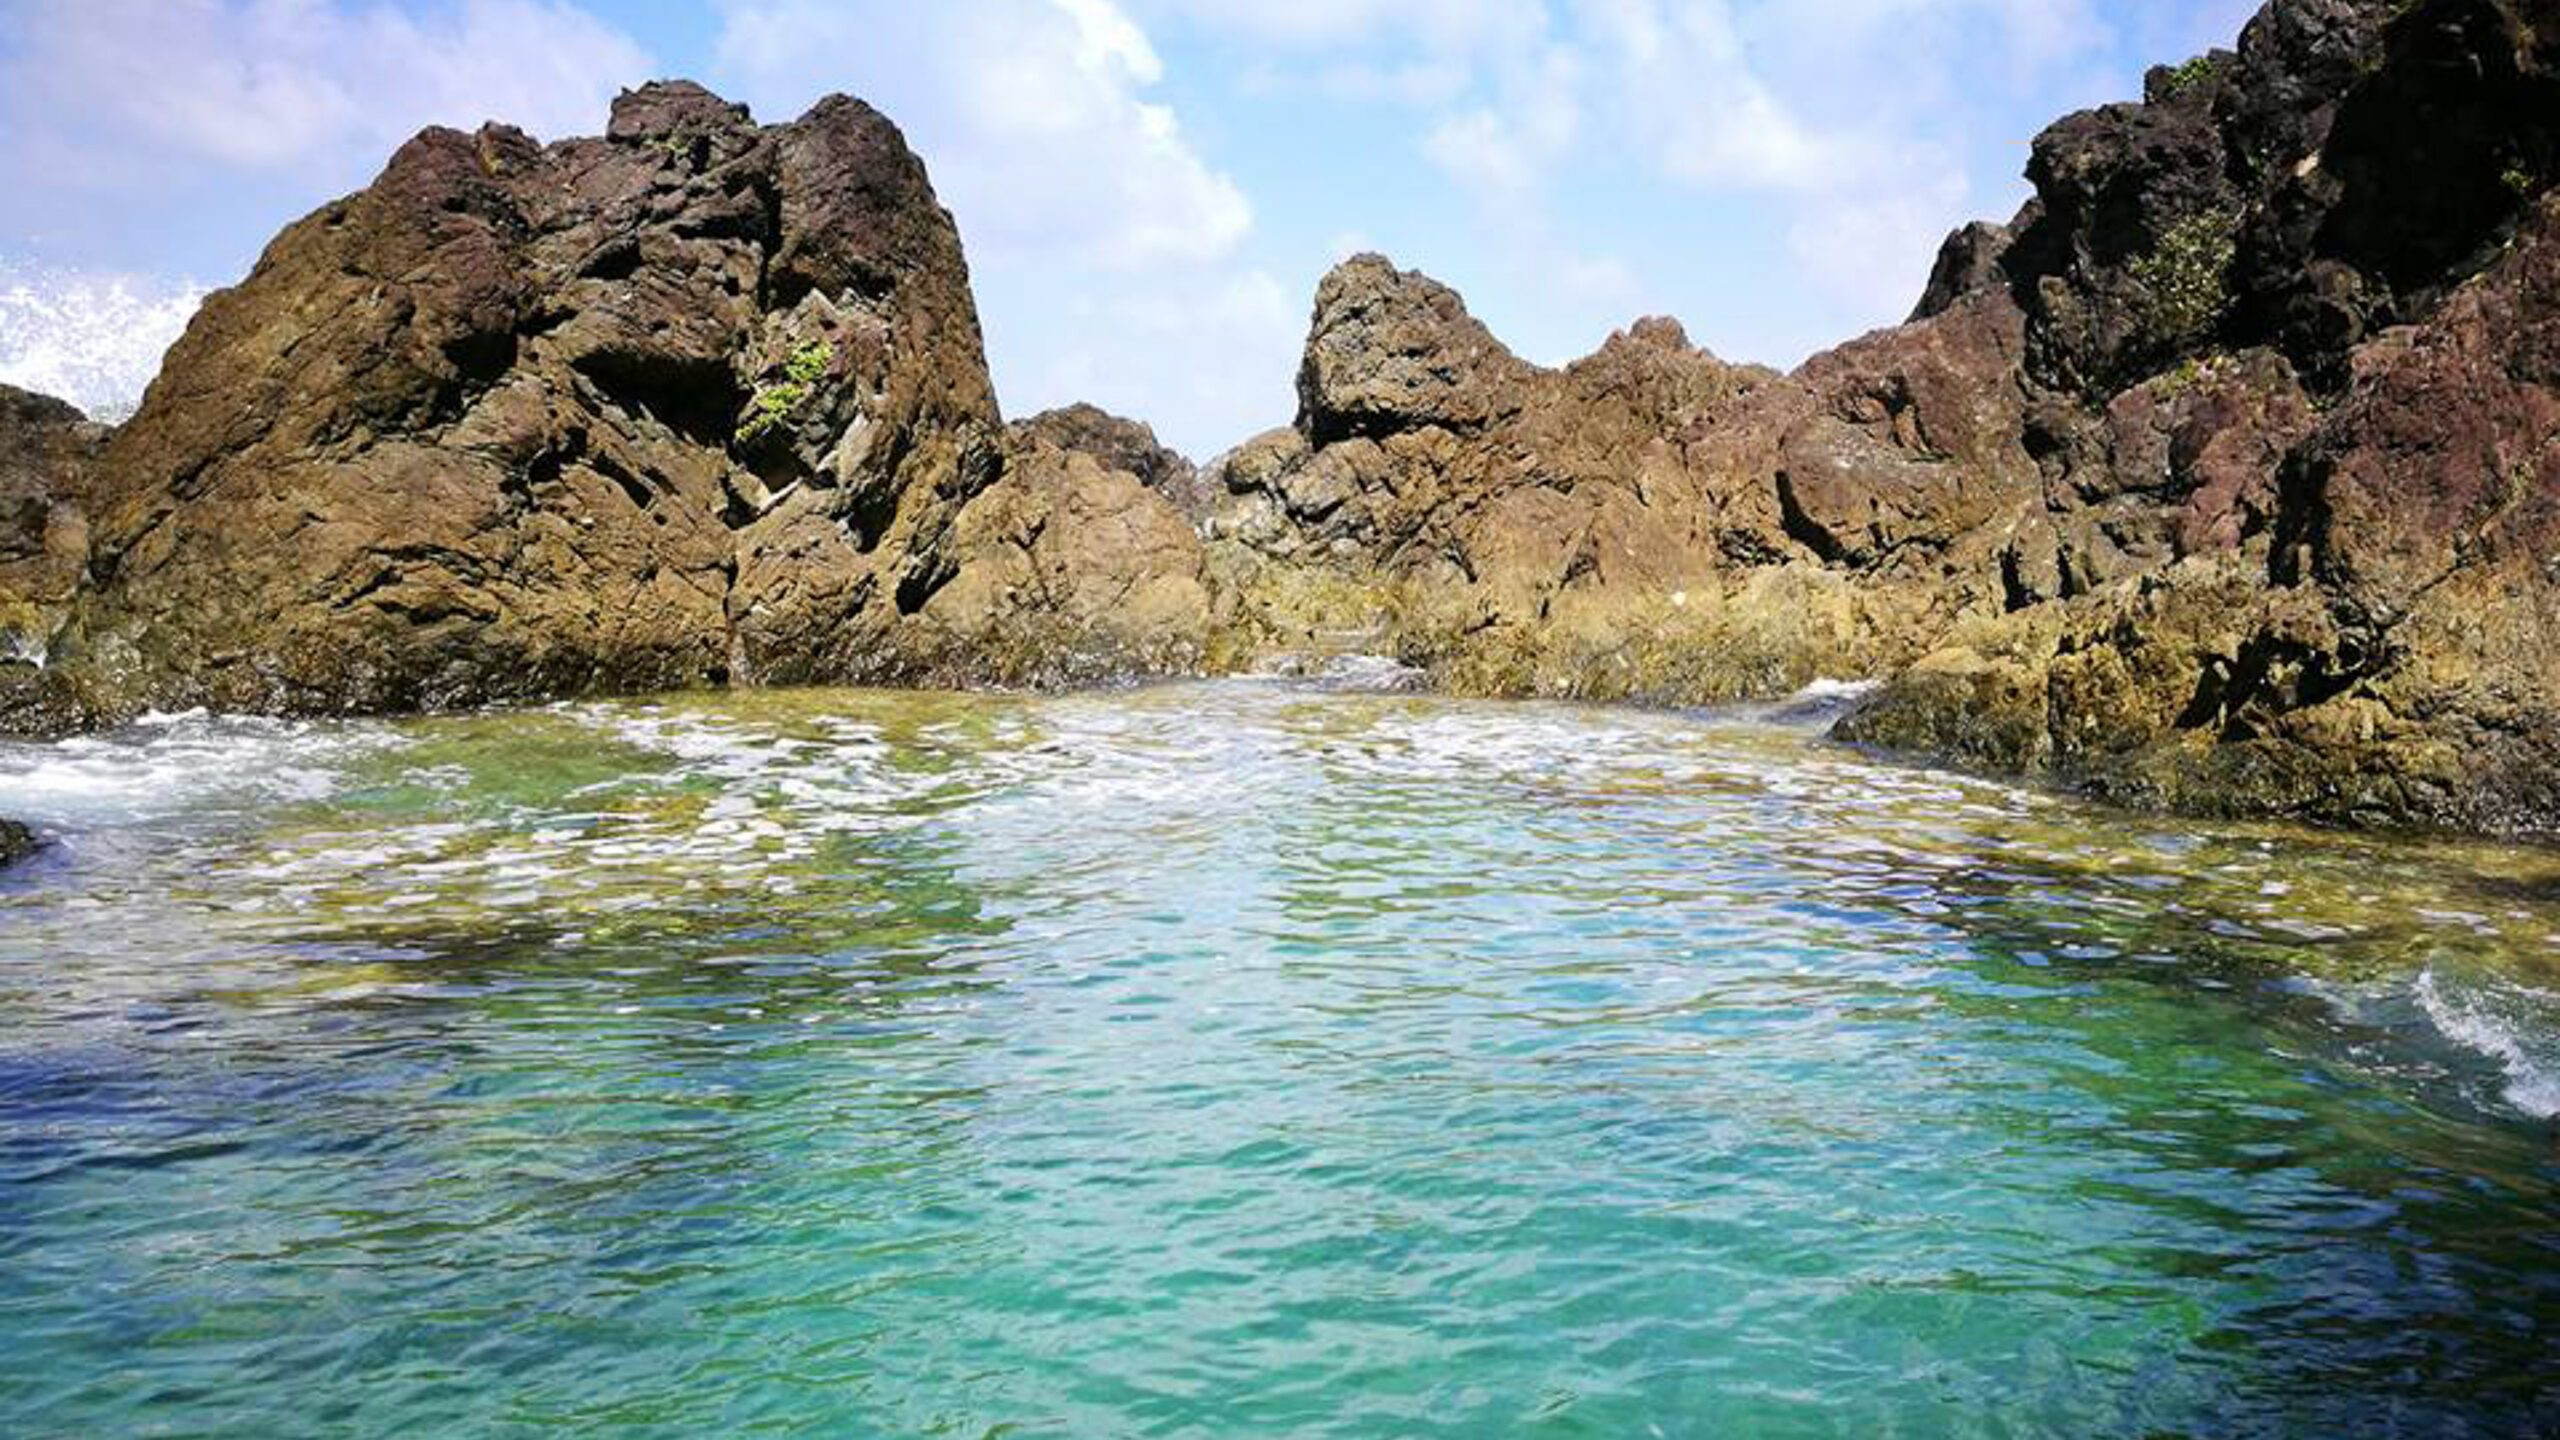 Travel guide: 6 must-see beaches and tourist spots in Catanduanes